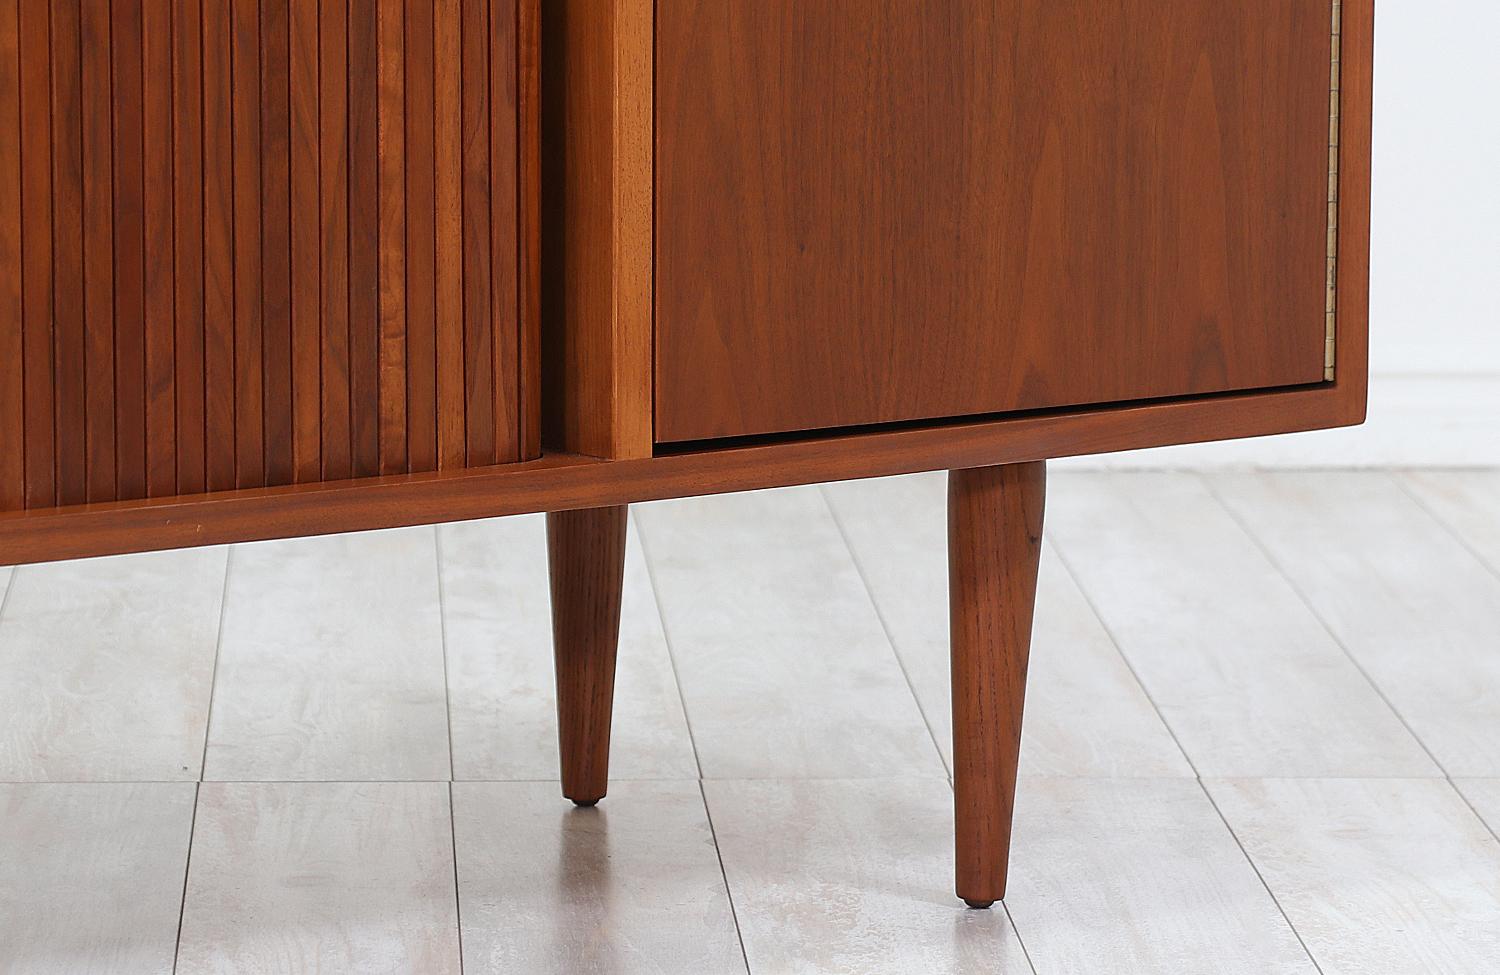 Milo Baughman Tambour-Door Credenza with Lacquered Drawers for Glenn of Cal. 2